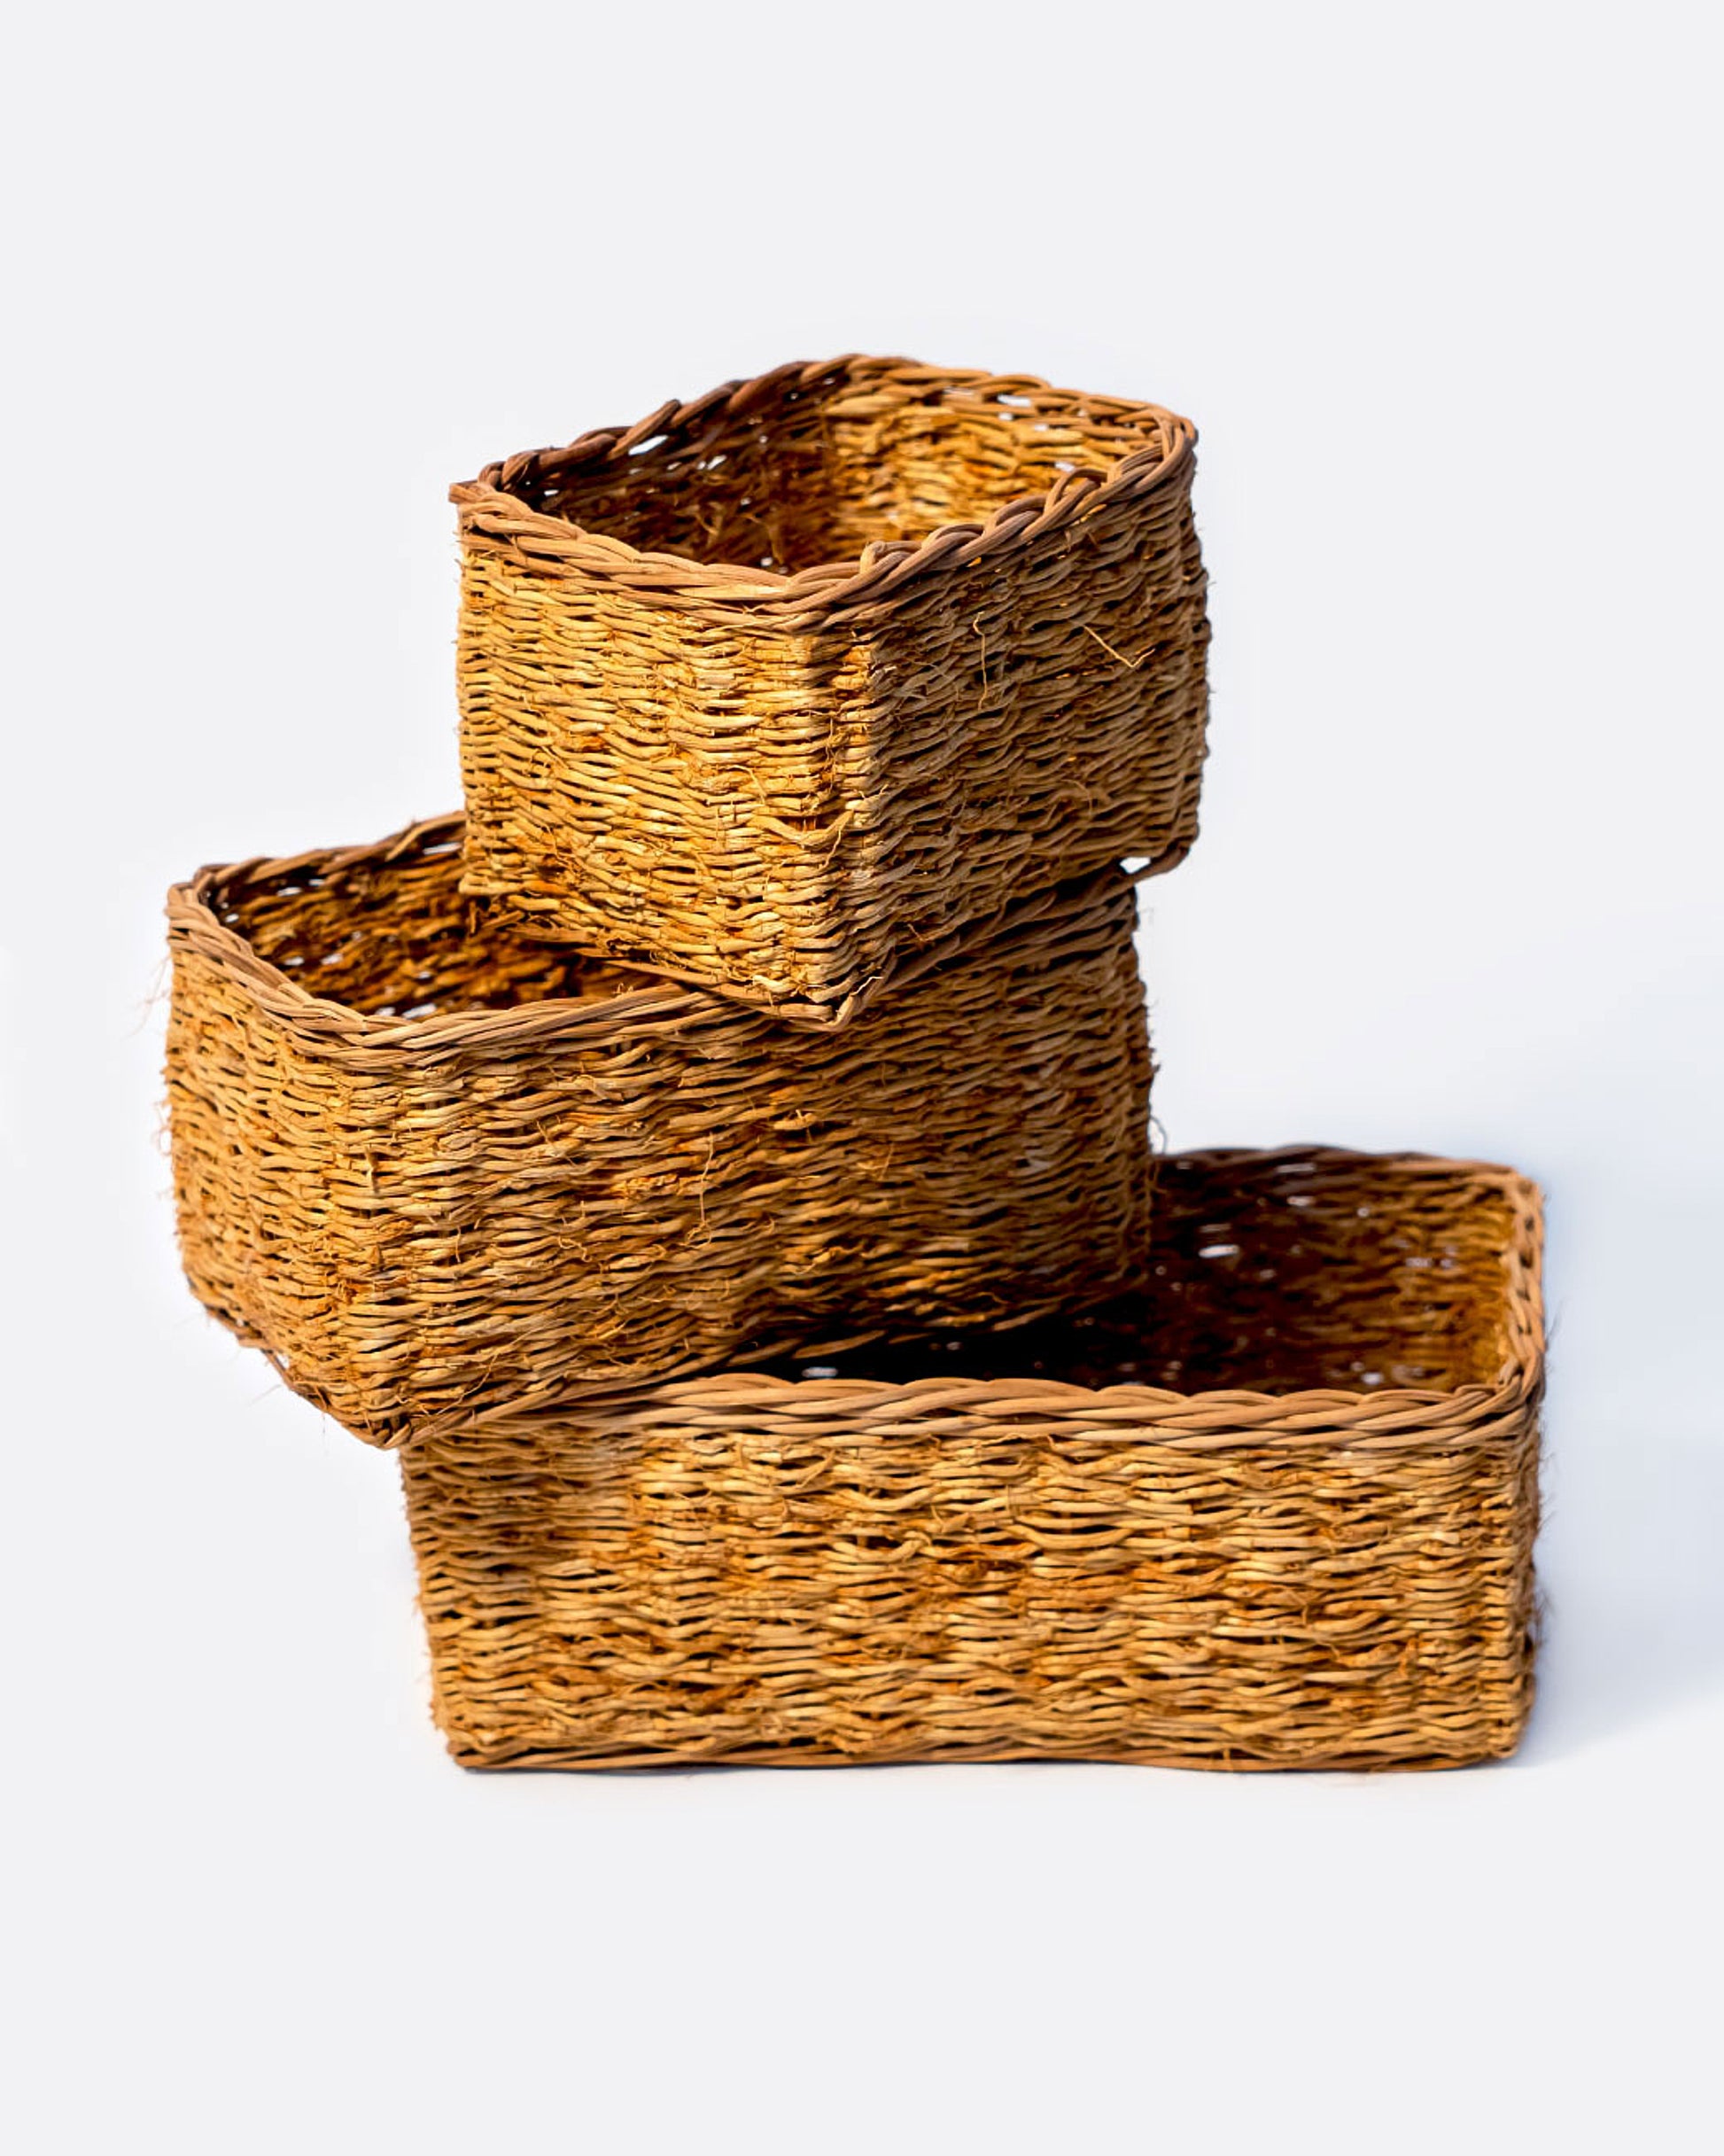 Stack of all three sizes of the vetiver baskets.